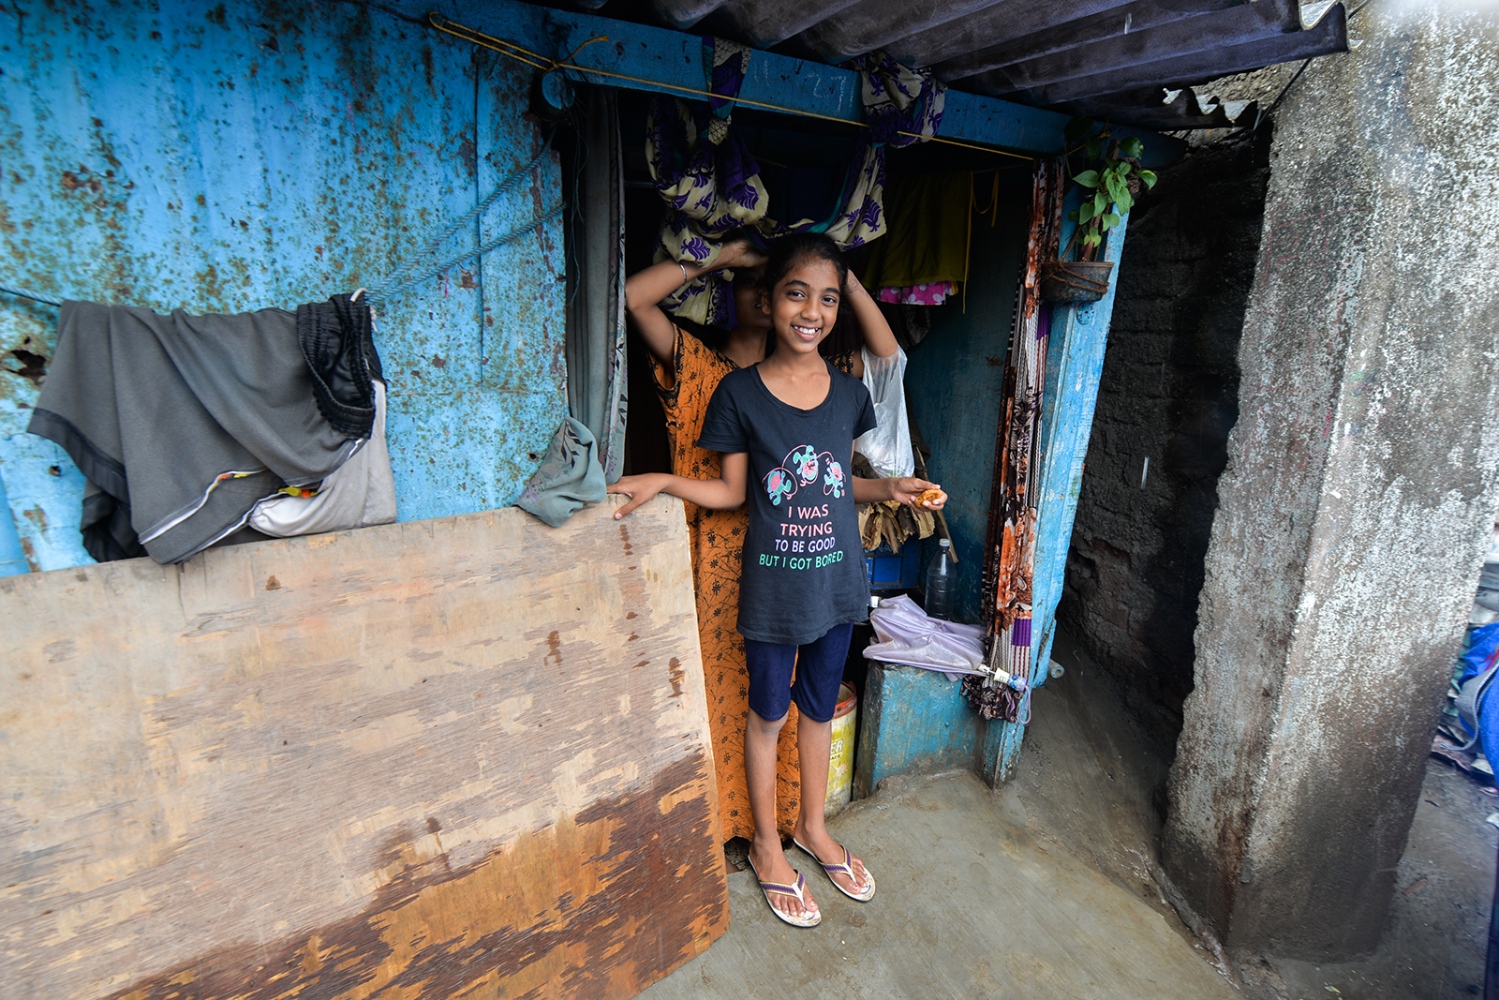 Development over community: perspective from a Mumbai fishing village 